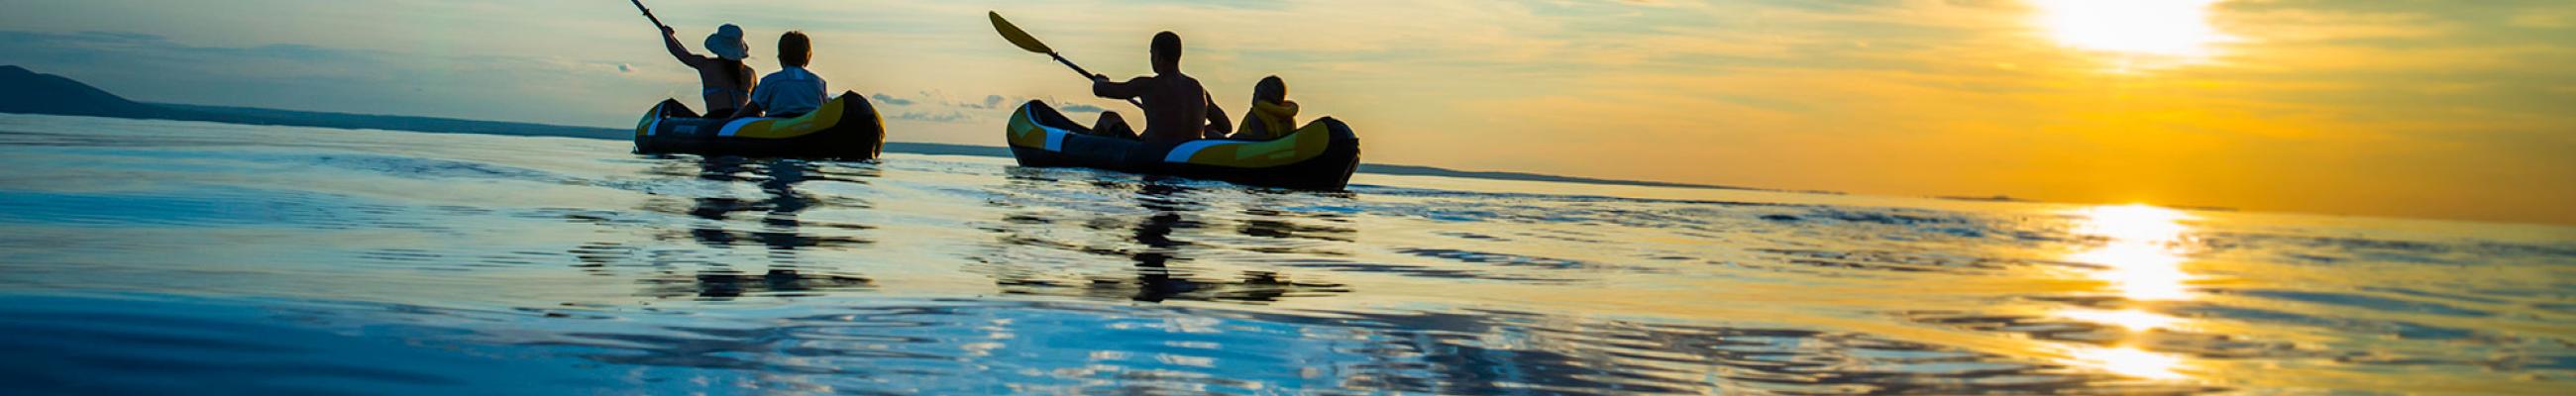 Family canoeing at sunset